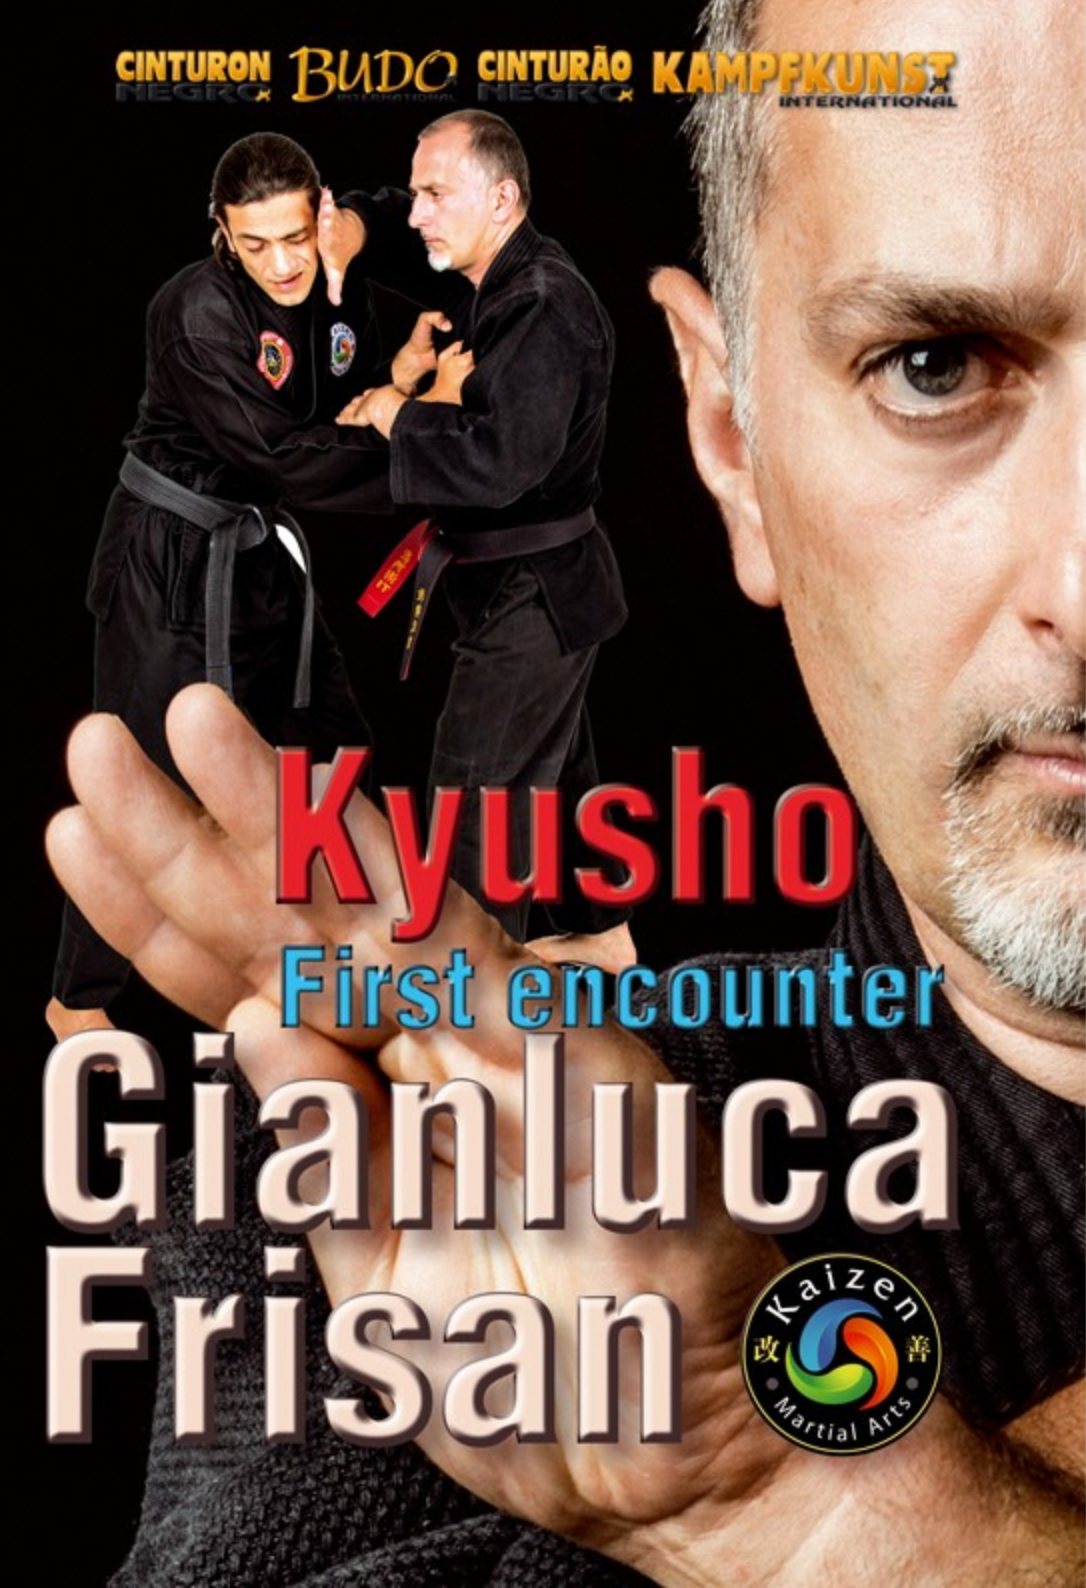 Kyusho First Encounter DVD with Gianluca Frisan - Budovideos Inc